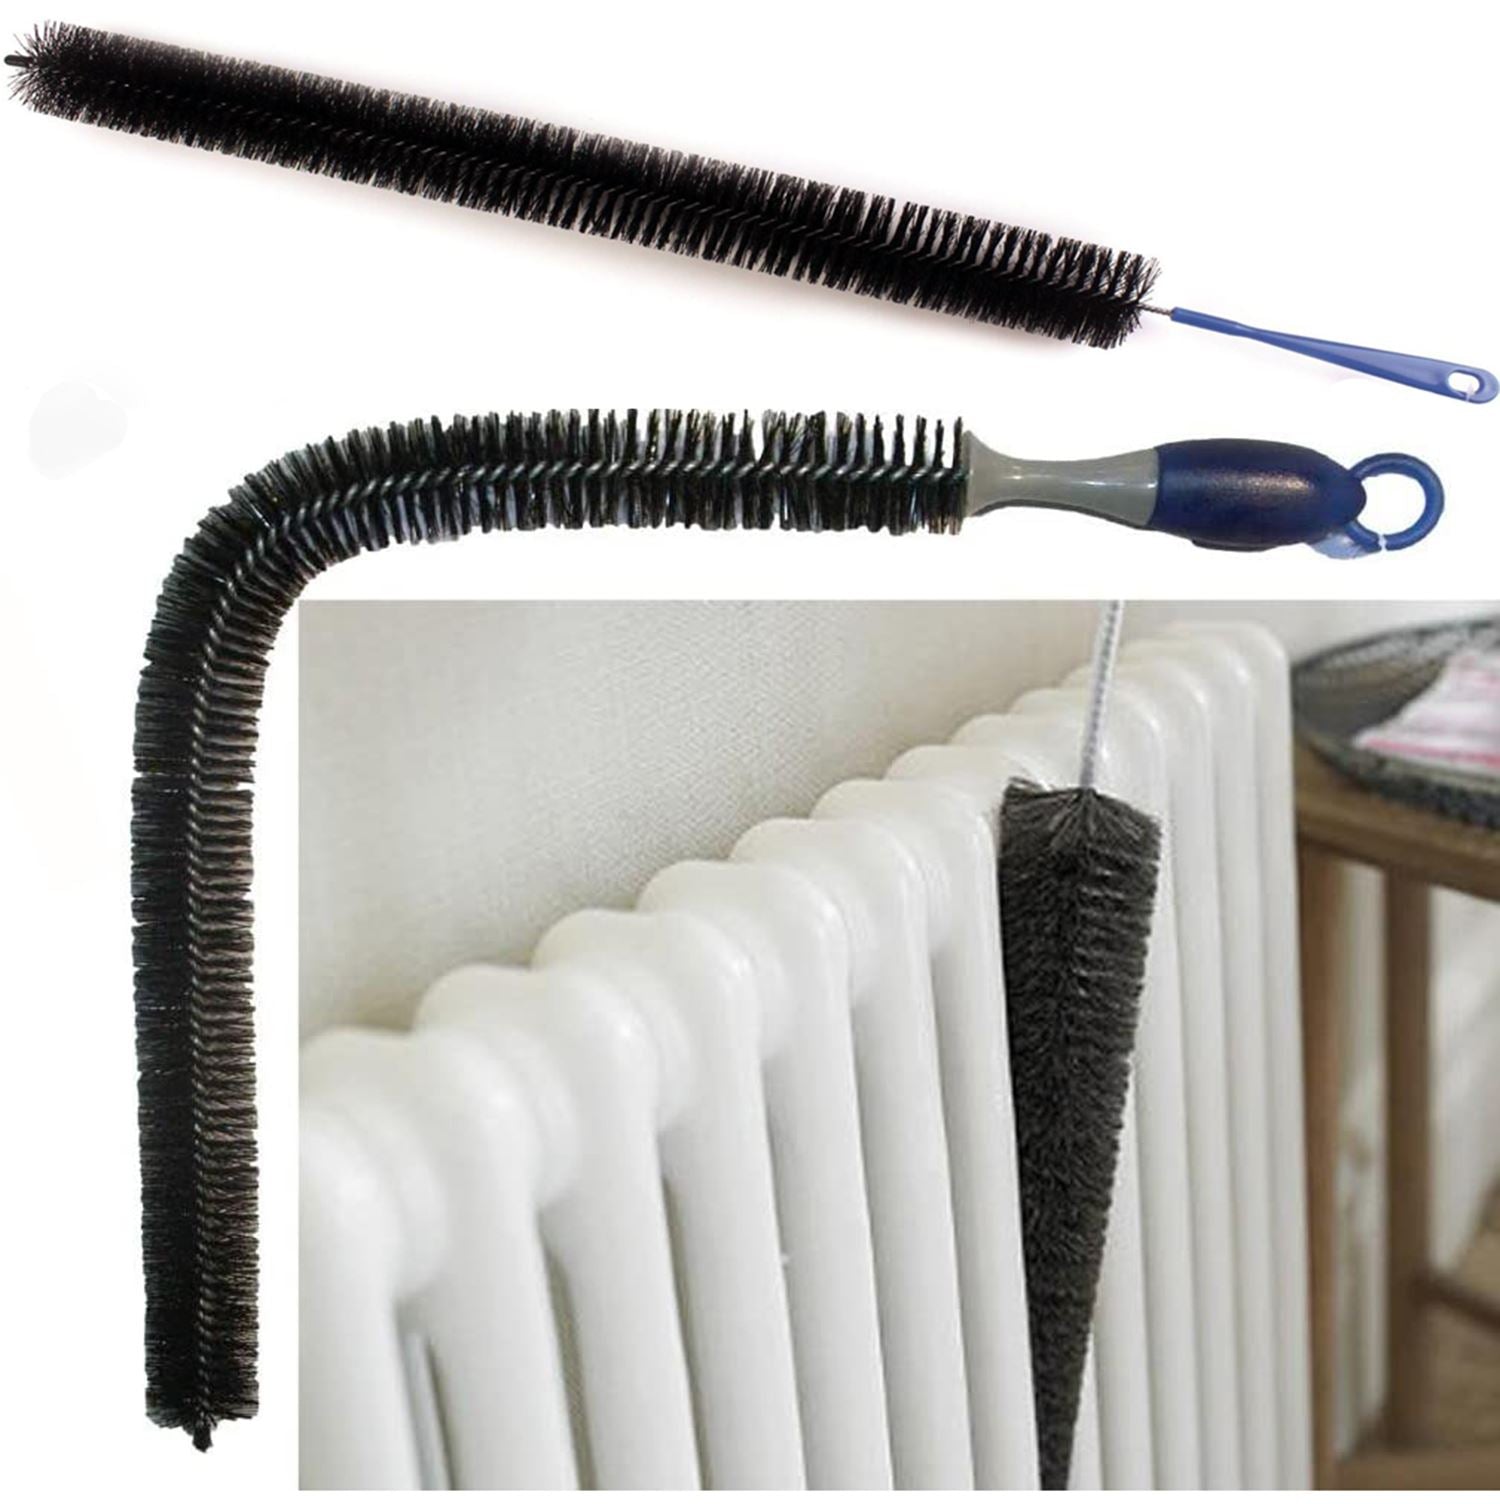 Which Radiator Cleaning Brush Is The Best?, Rotarad